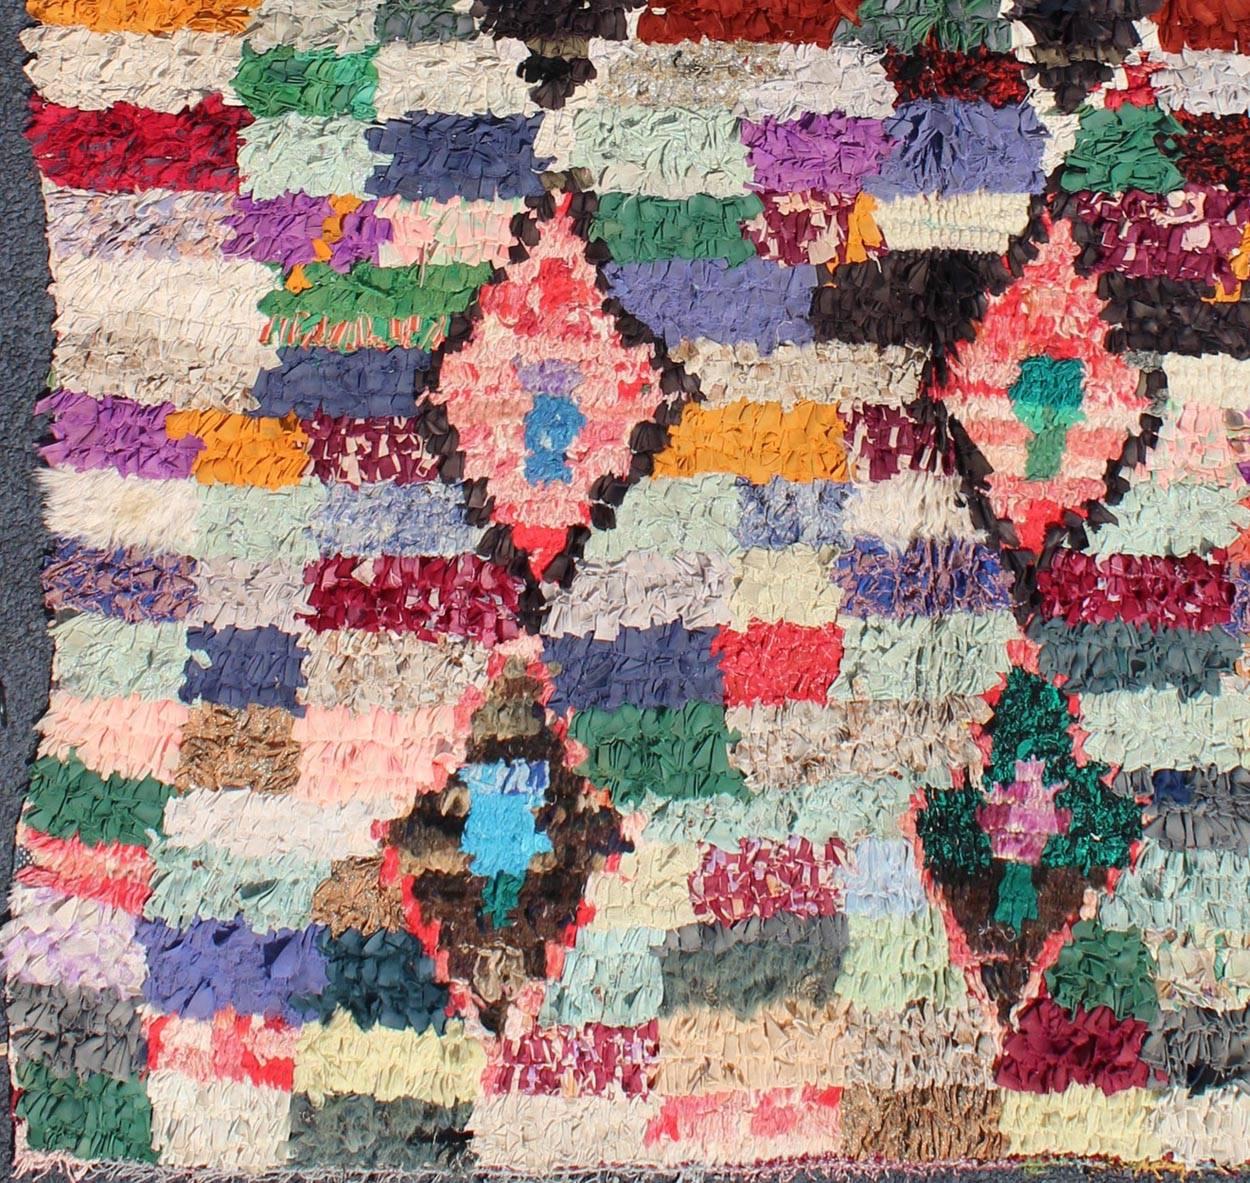 Measures: 5'2 x 6'7.
Vintage Boucharouette Moroccan rug with diamond and Checkered Design multi colors.
Rendered in diamond shapes with a spotted and speckled assortment of rich colors, this very unique Moroccan rug has an abstract design with